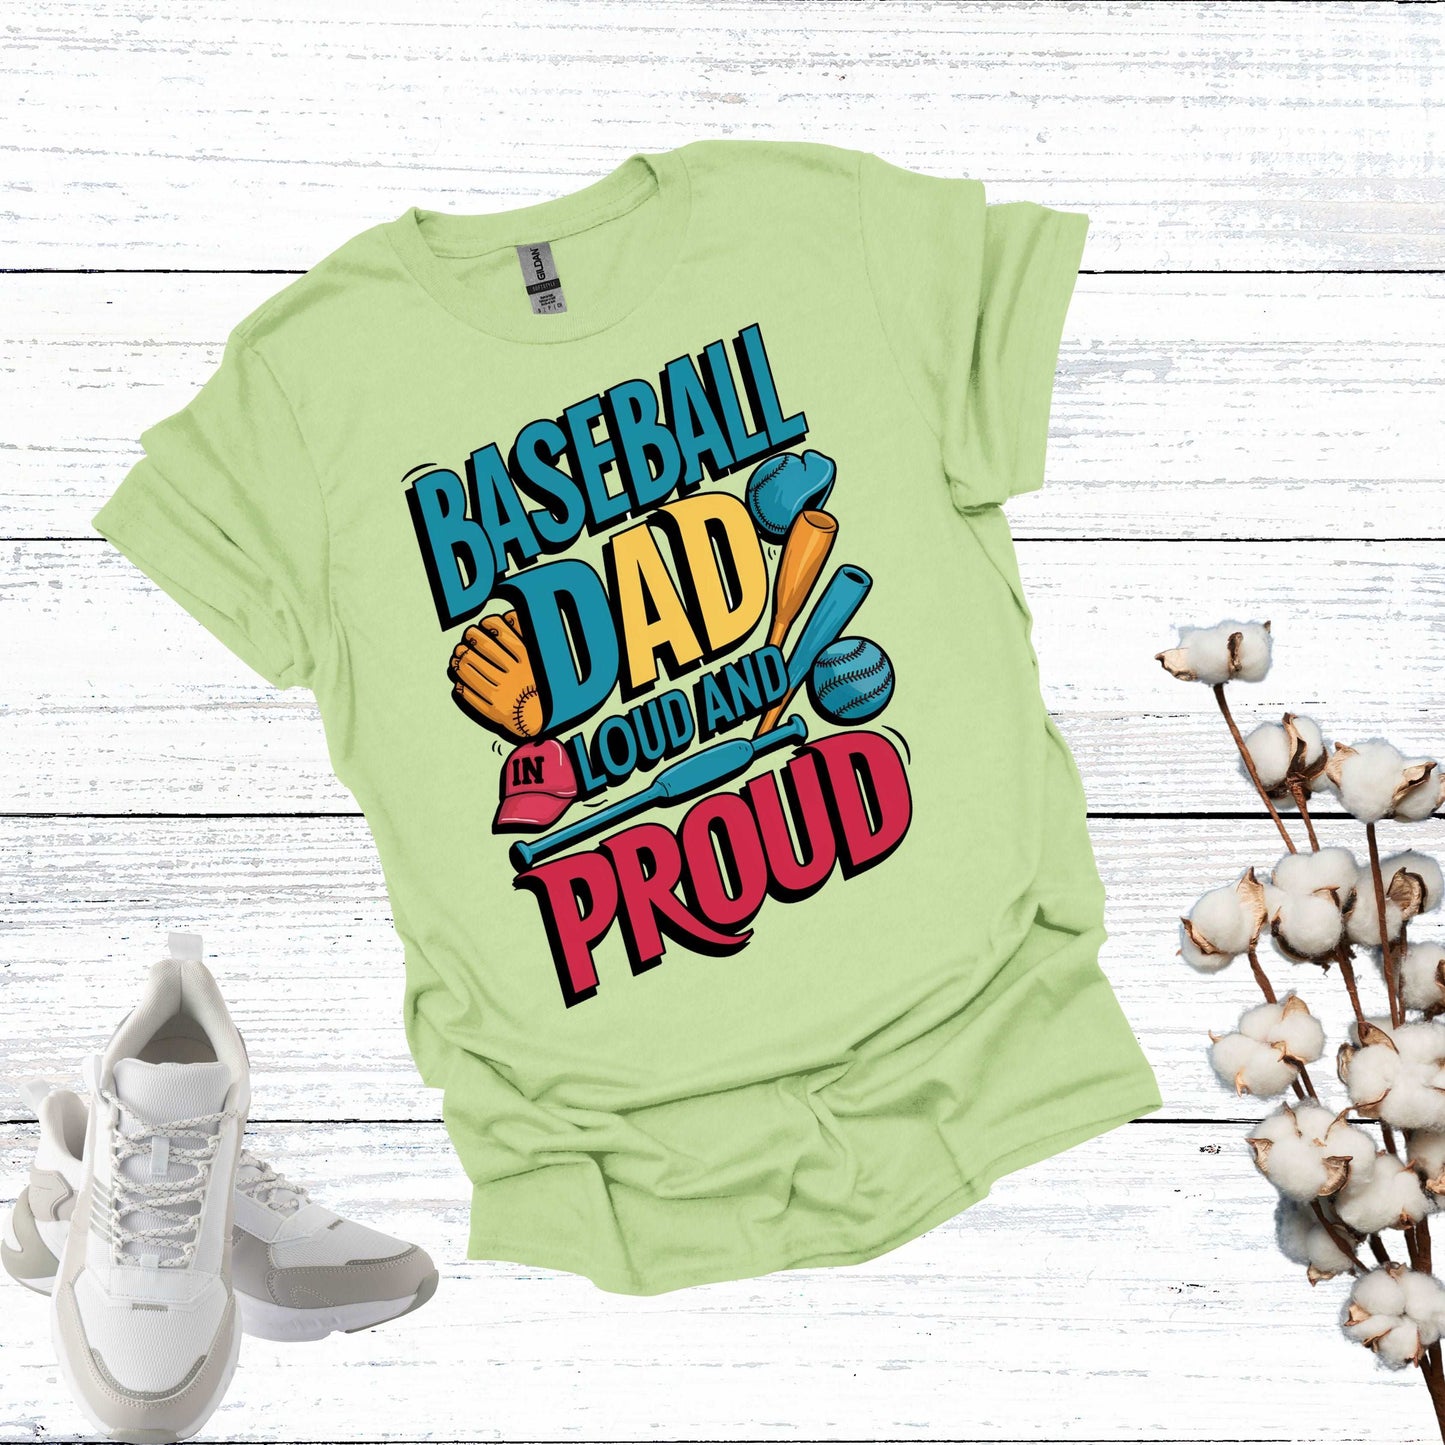 Baseball Dad Pistachio Shirt - Fathers are Loud and Proud